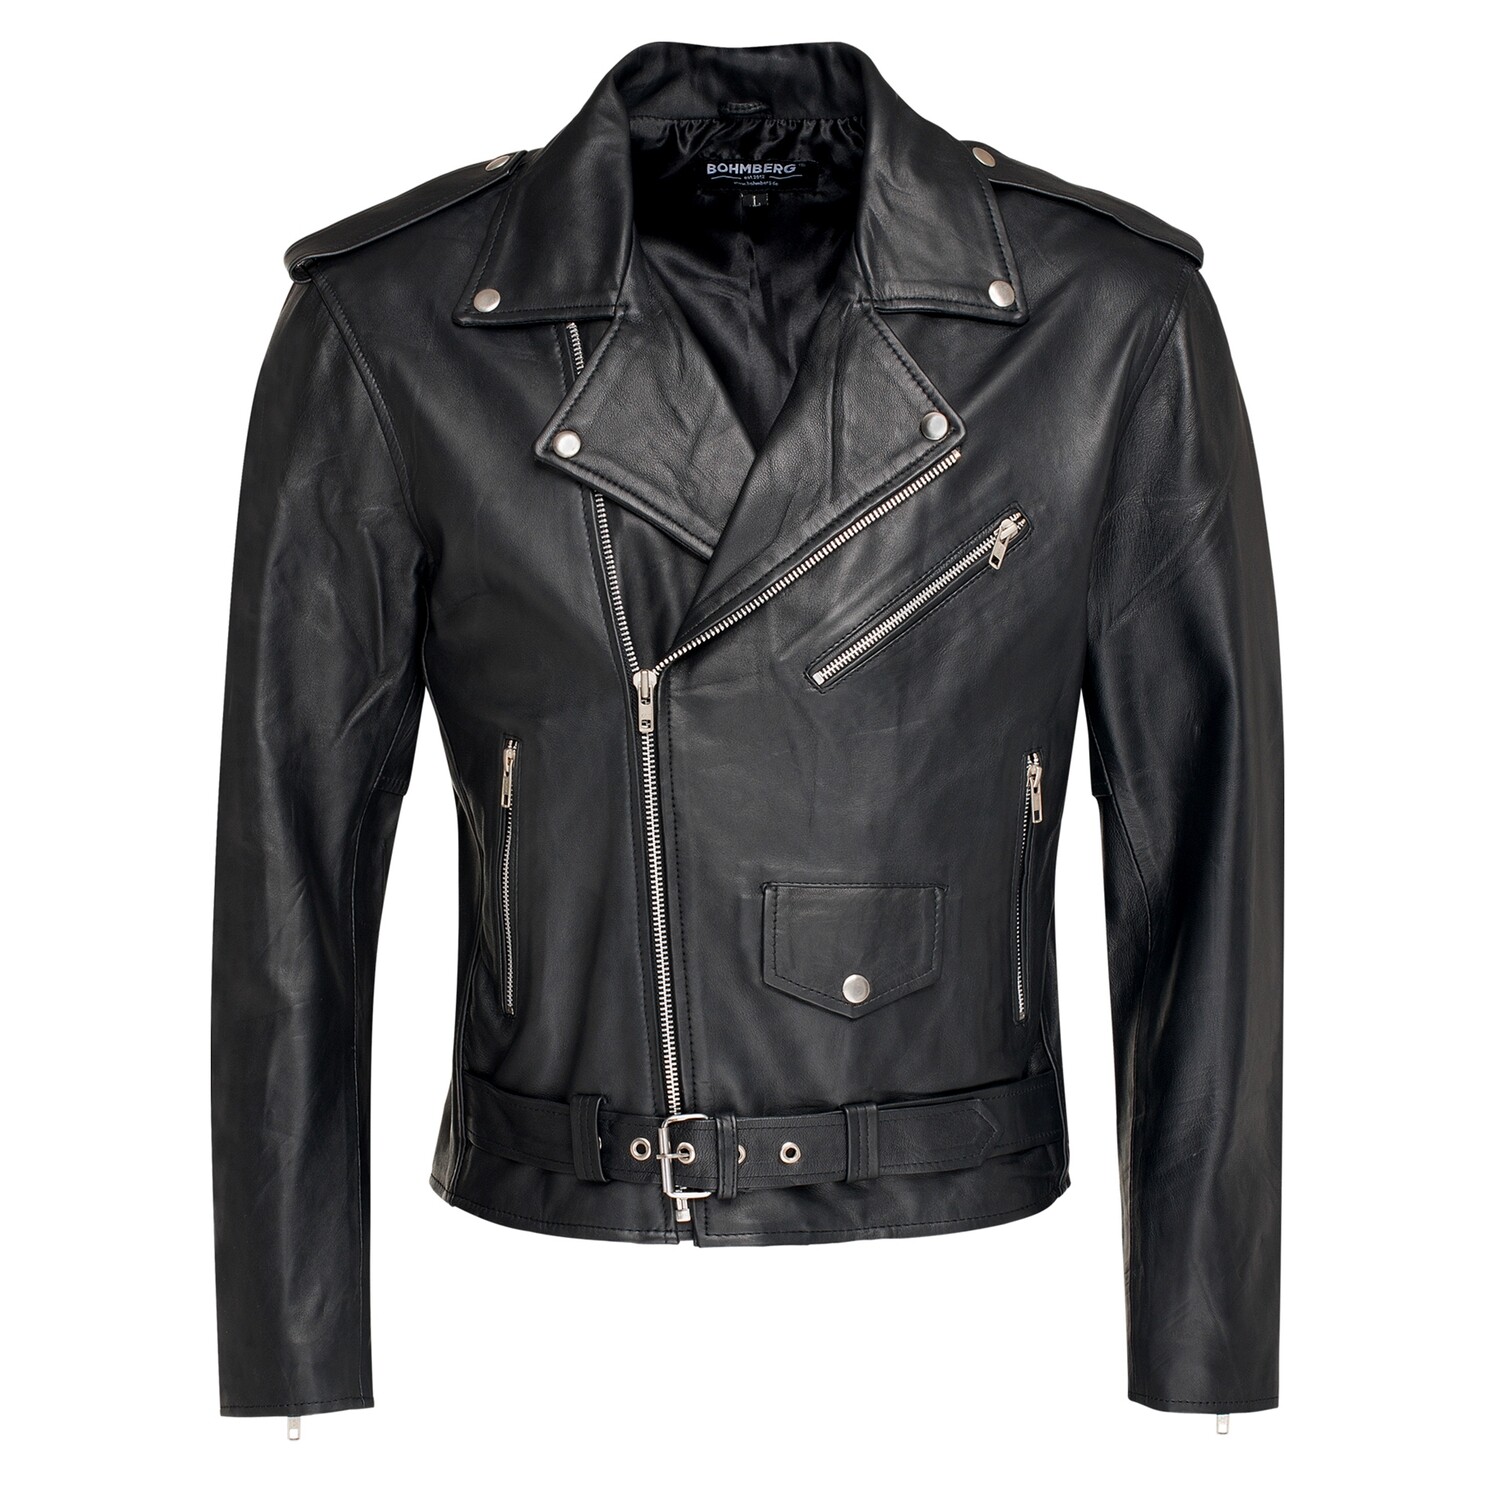 Bohmberg BRANDIDO Men's Leather Jacket made of soft Goat Nappa Leather in the classic Brando cut